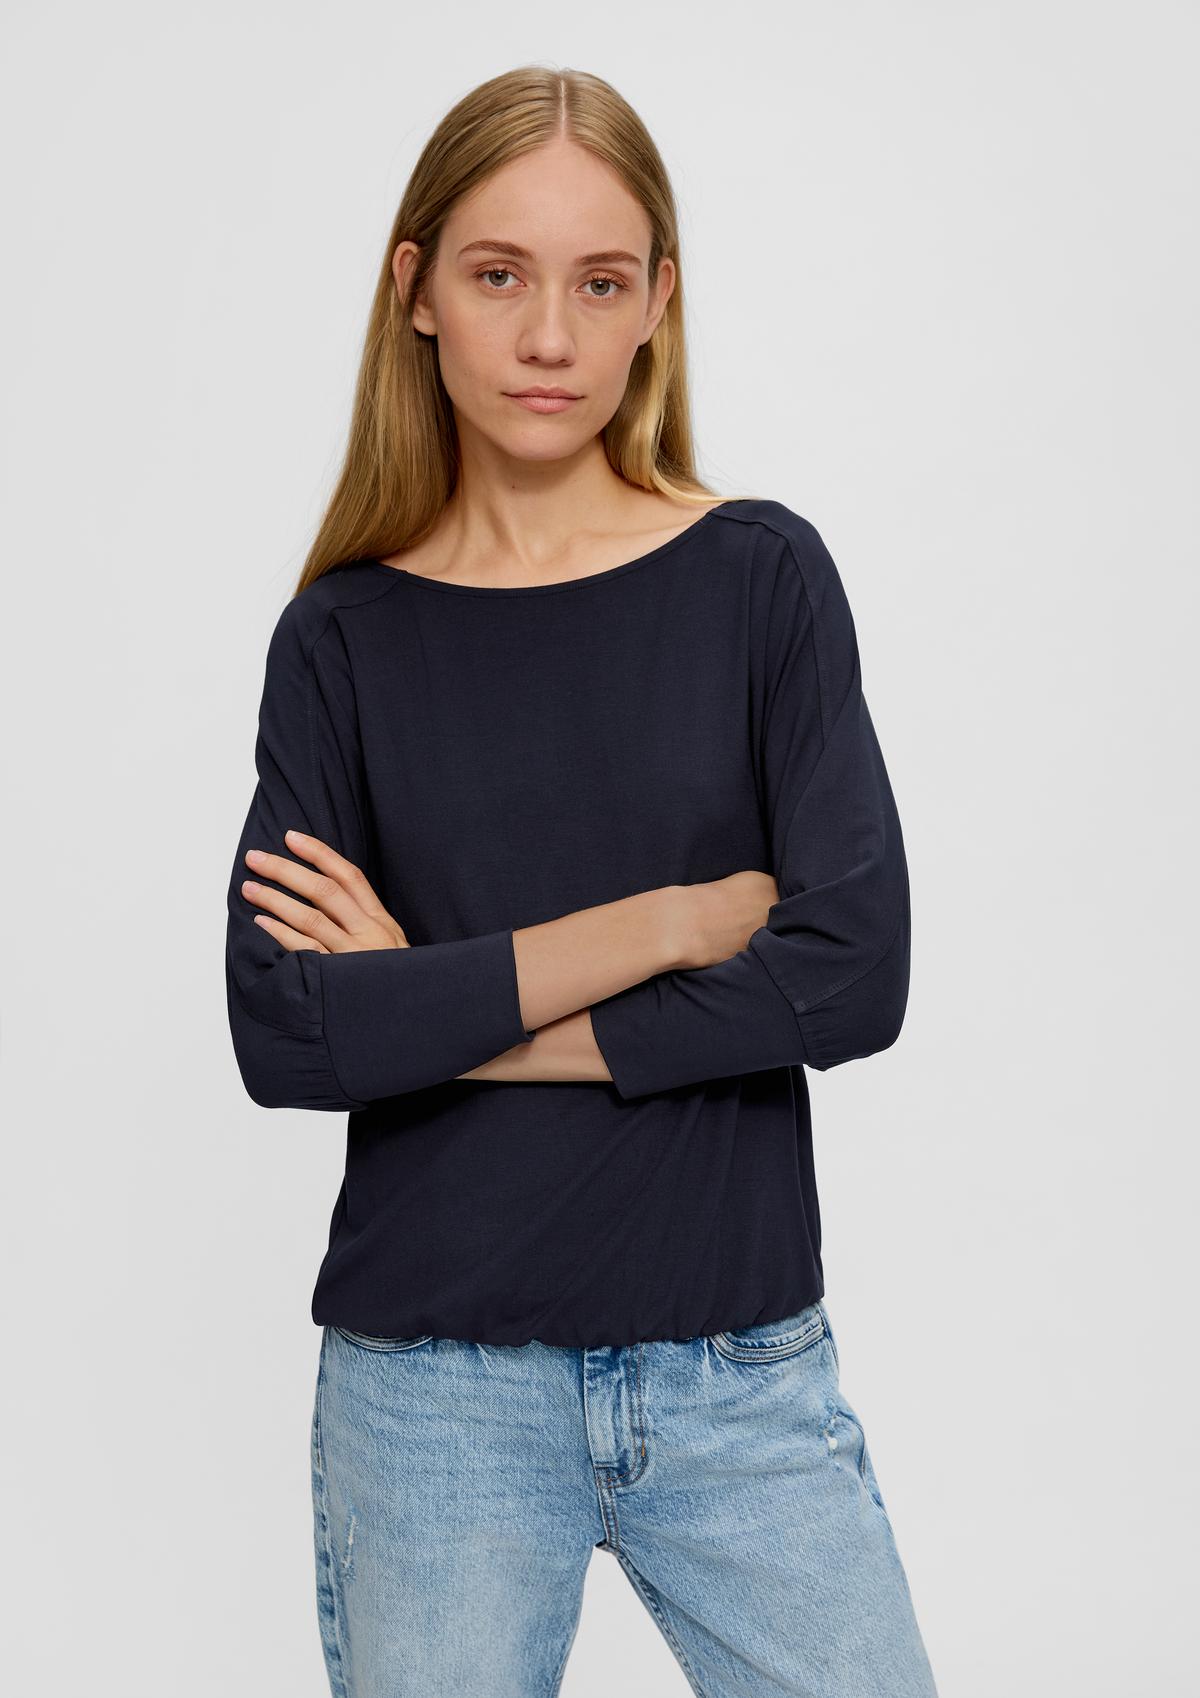 Long sleeve stretch in top - navy viscose